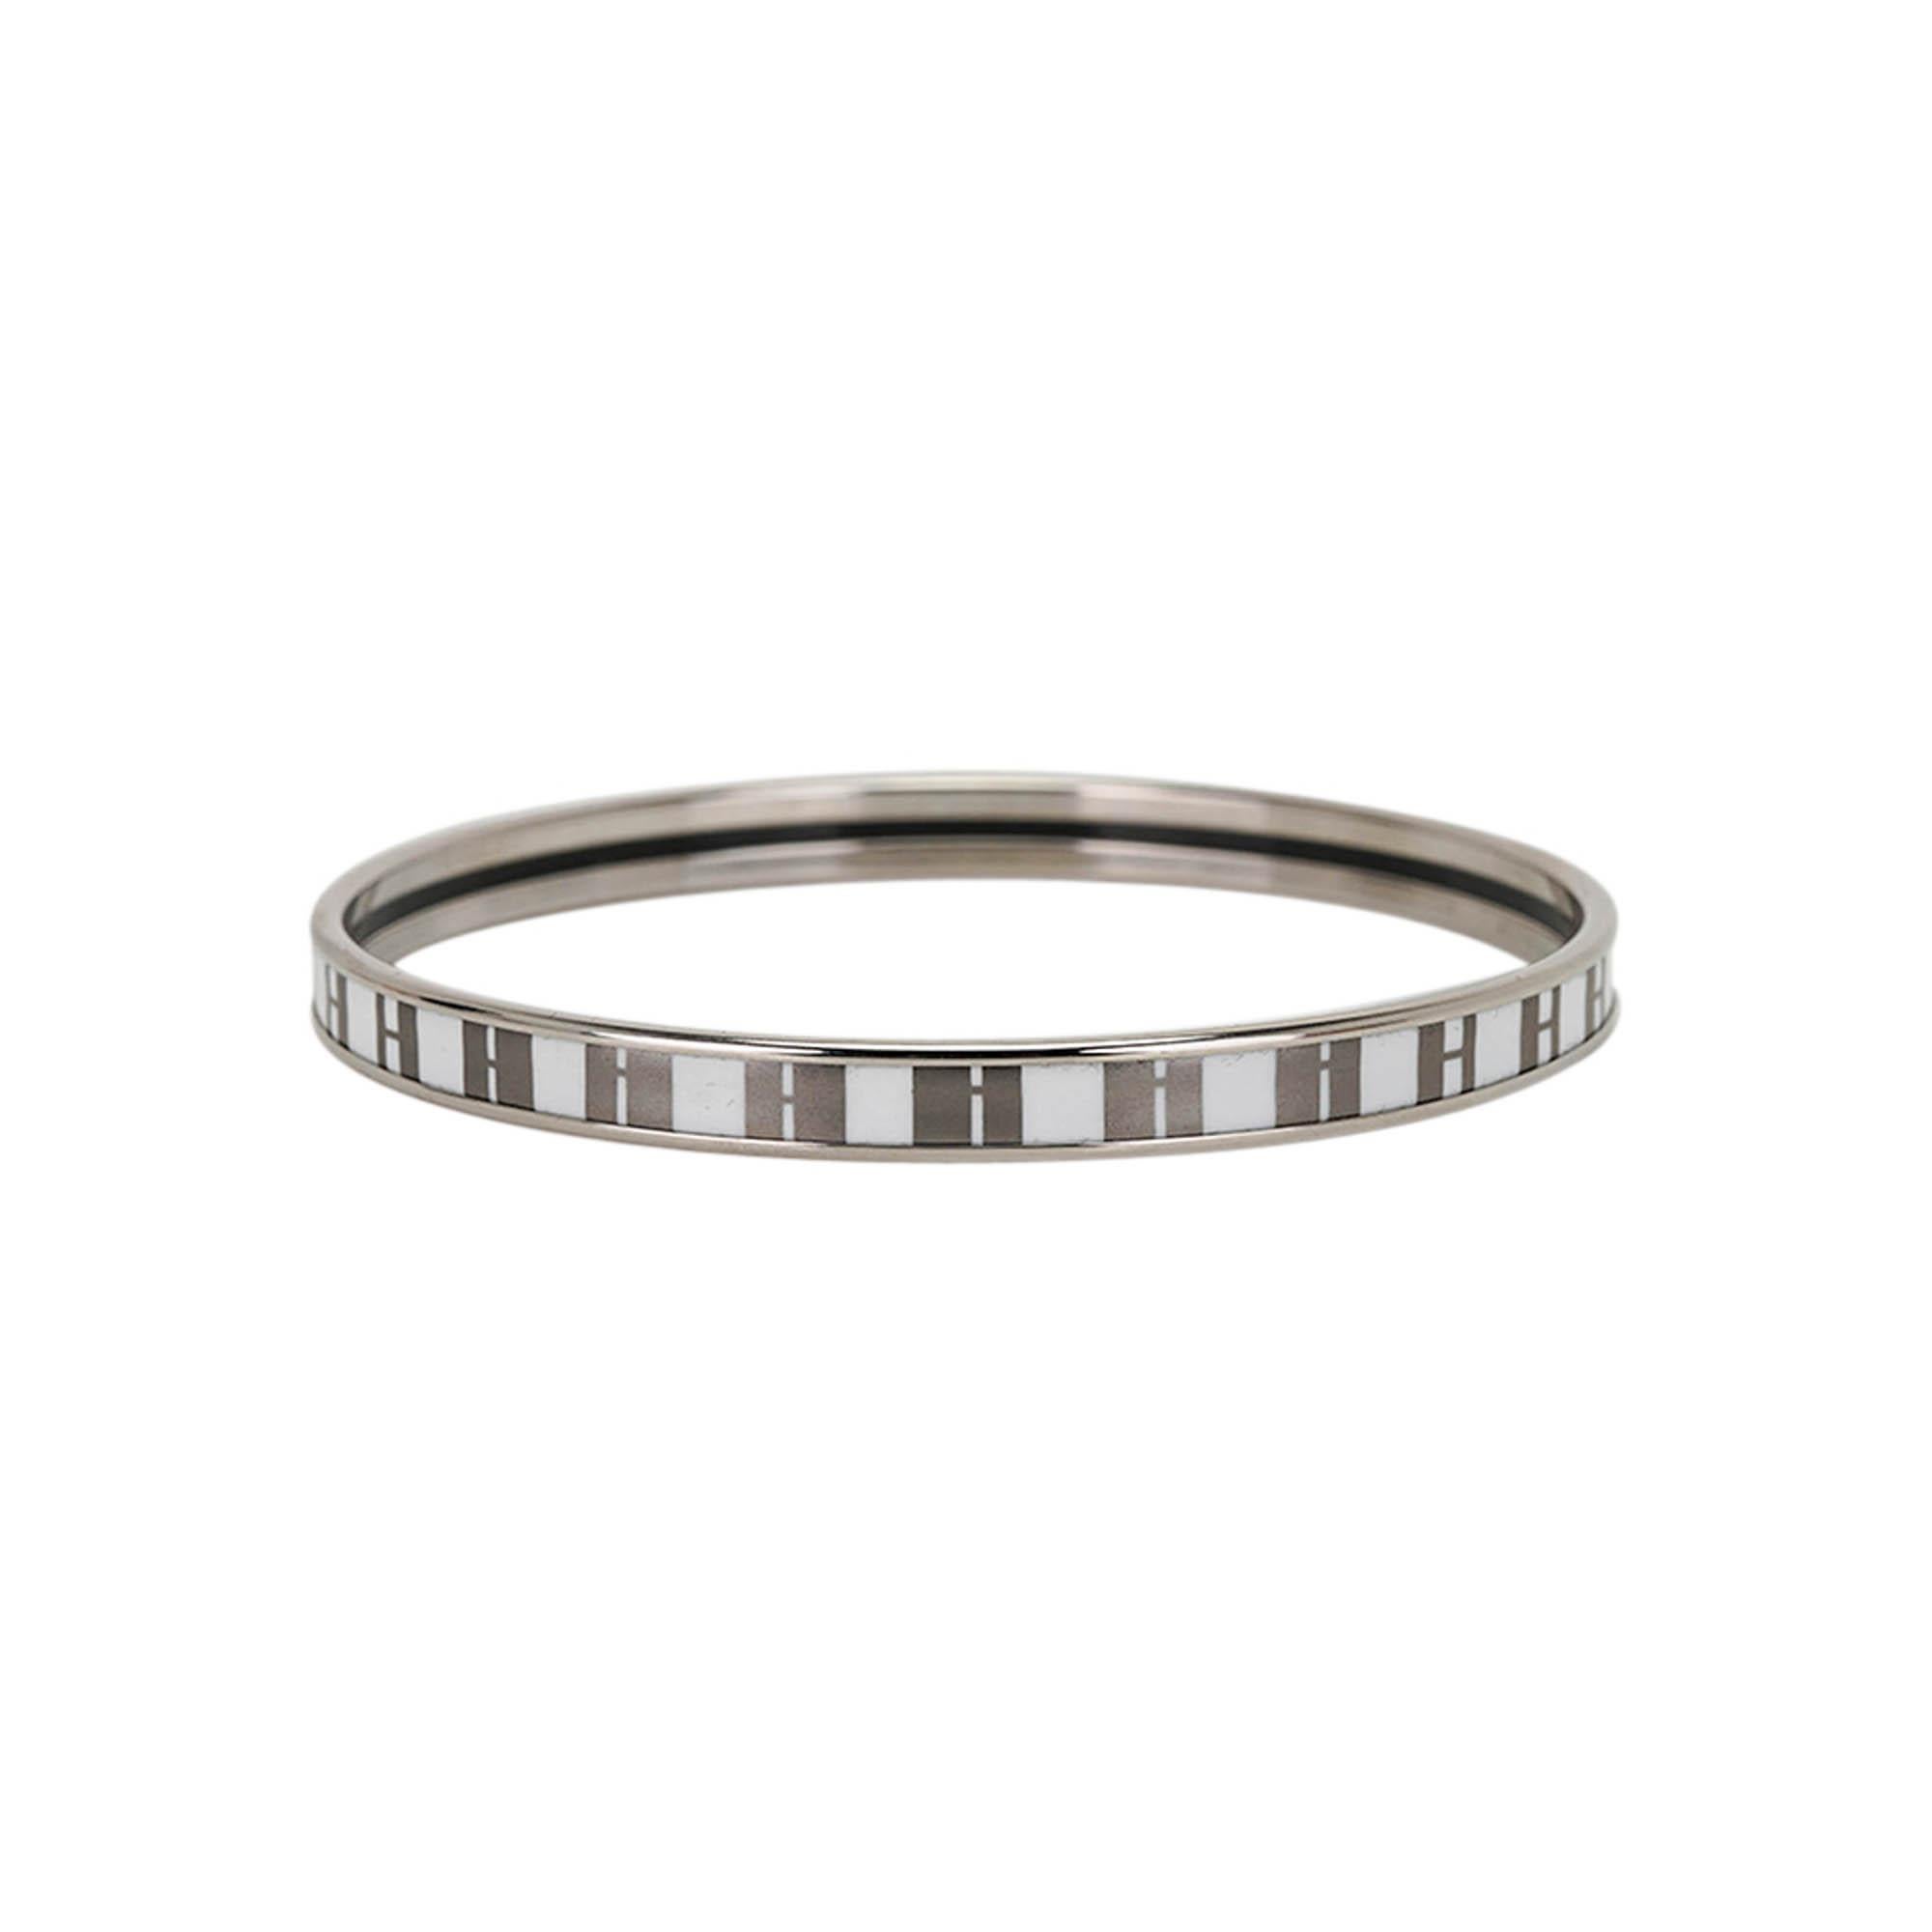 Mightychic offers an Hermes OP'H Bangle Bracelet featured in Blanc Platine colorway.
Enamel and Palladium plated.
Extra narrow and perfect for stacking.
Chic, modern and unmistakably Hermes!
Palladium hardware.
Made in France.
Comes with pouch and